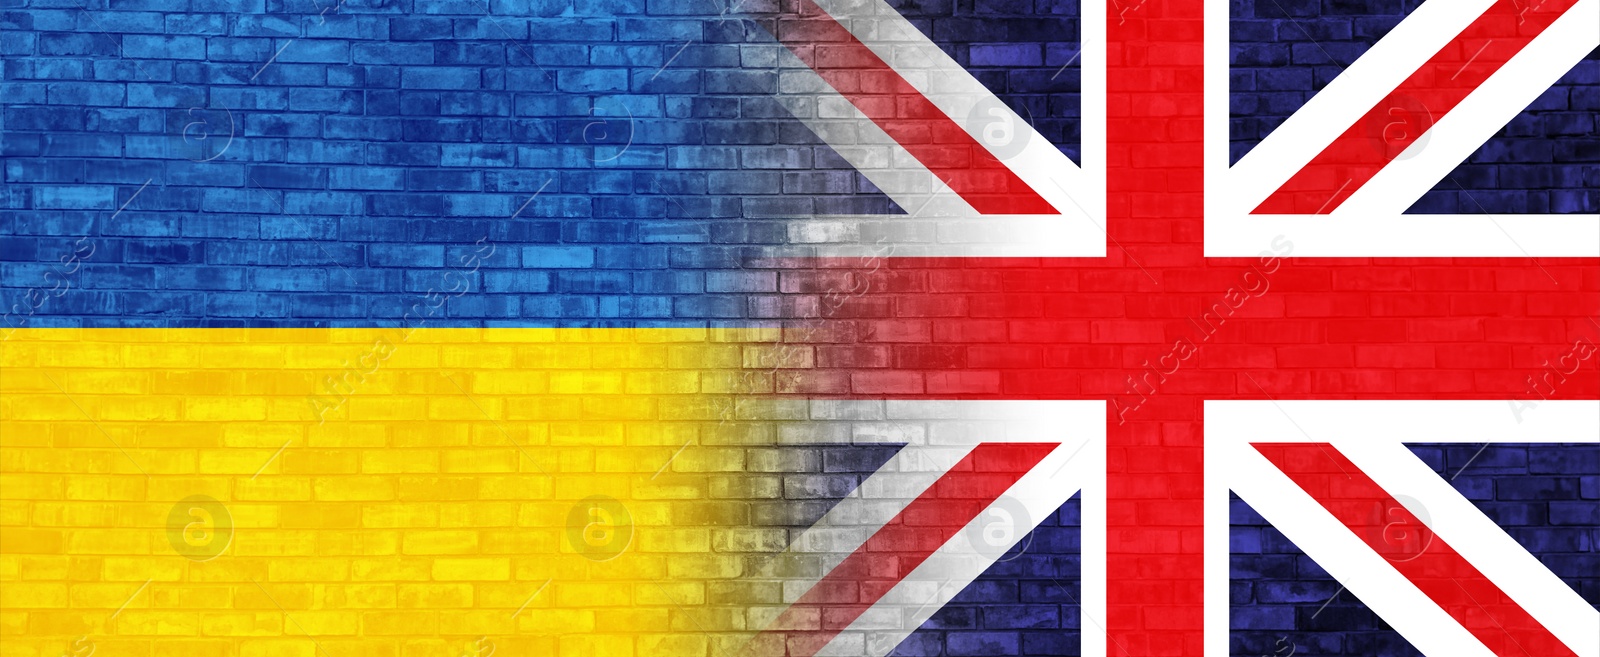 Image of Flags of United Kingdom and Ukraine on brick wall, banner design. International diplomatic relationships